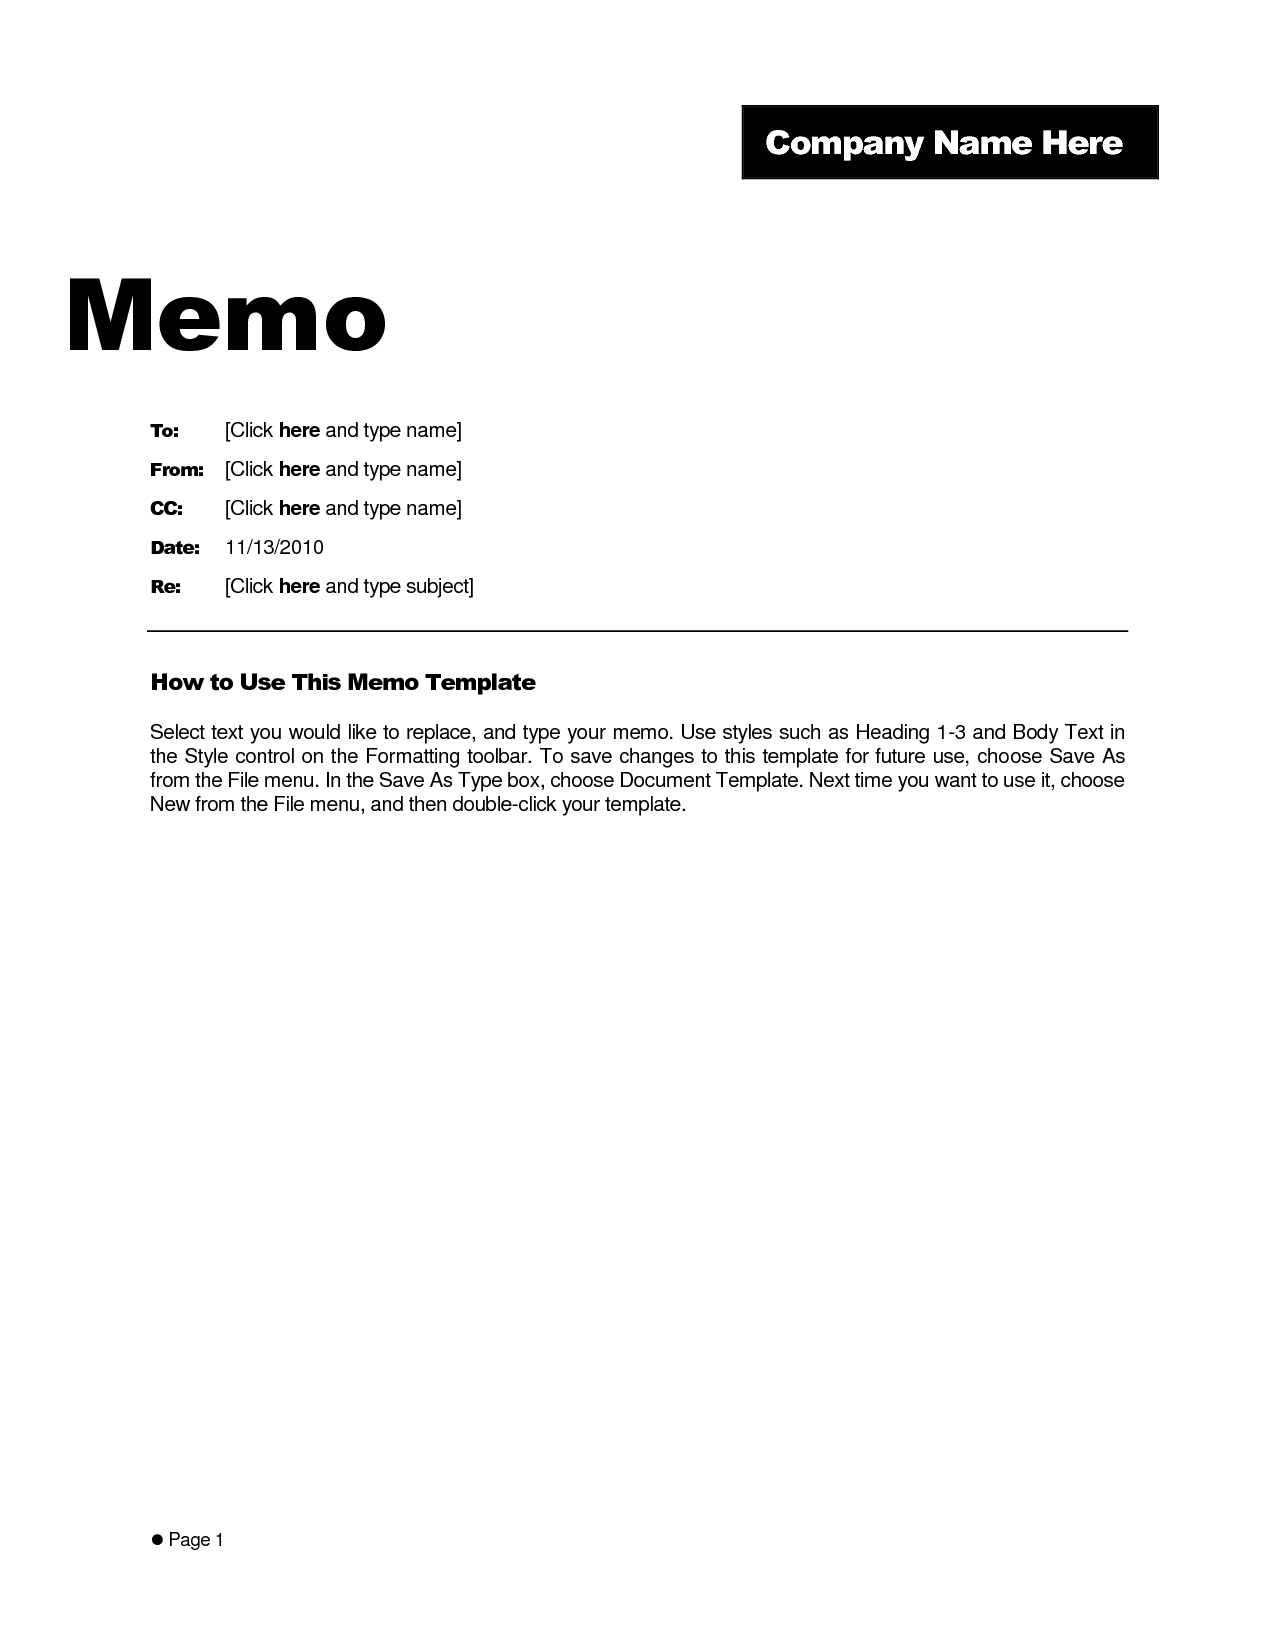 Microsoft Word Memo Template Example – Teplates For Every Day Pertaining To Memo Template Word 2013